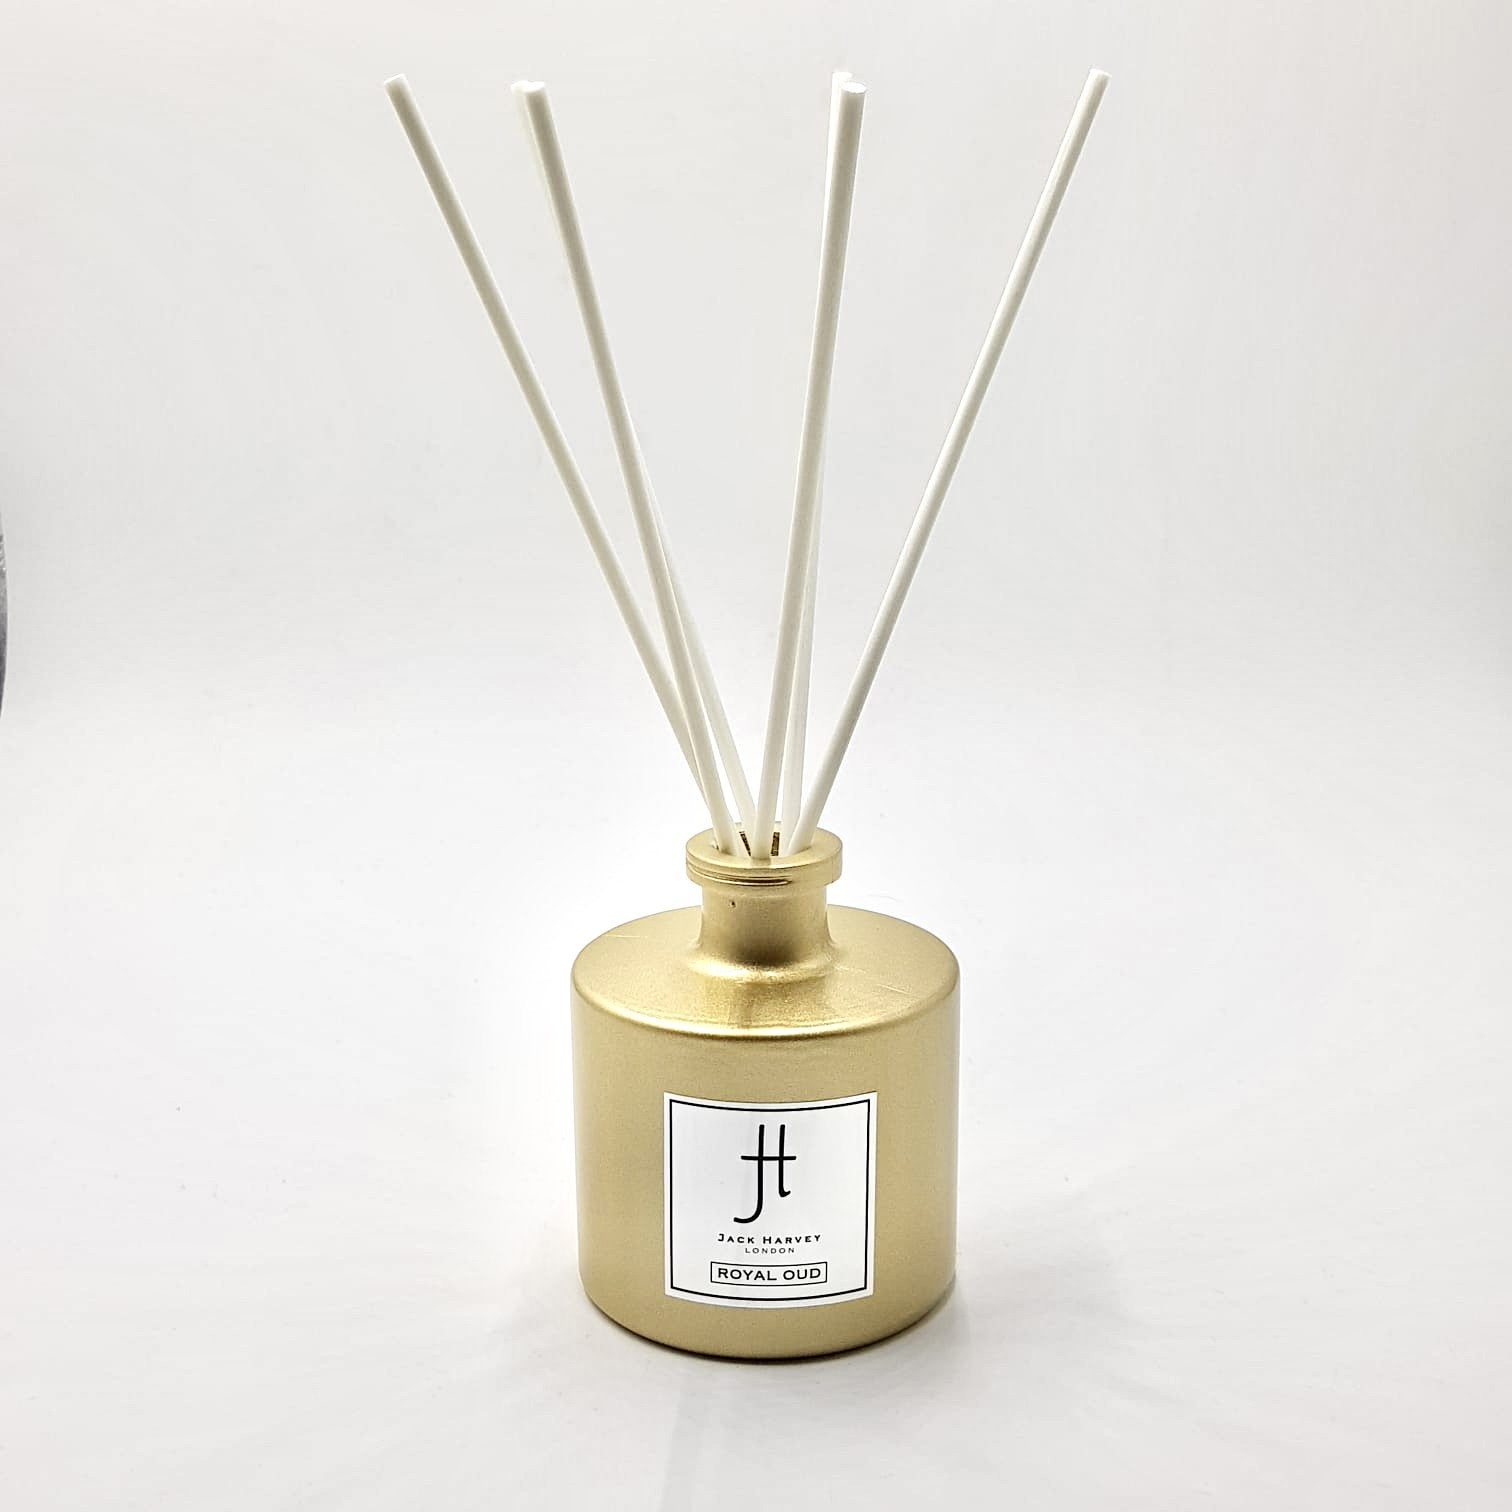 MAYFAIR GOLD LIMITED EDITION -  200ml GOLD REED DIFFUSER